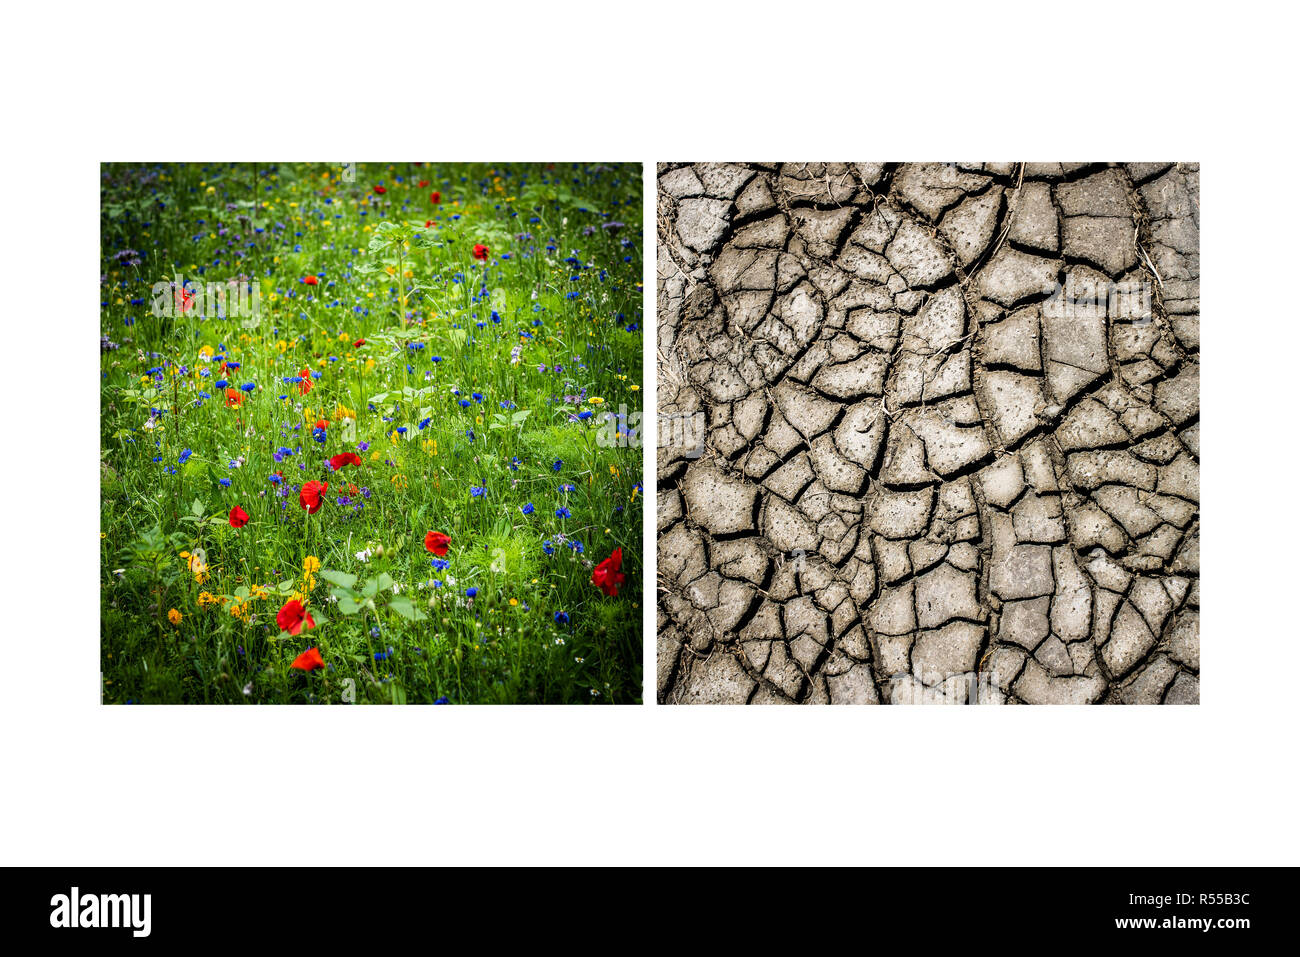 Fields of flowers and cracked mud, Illustration on climate change. Stock Photo